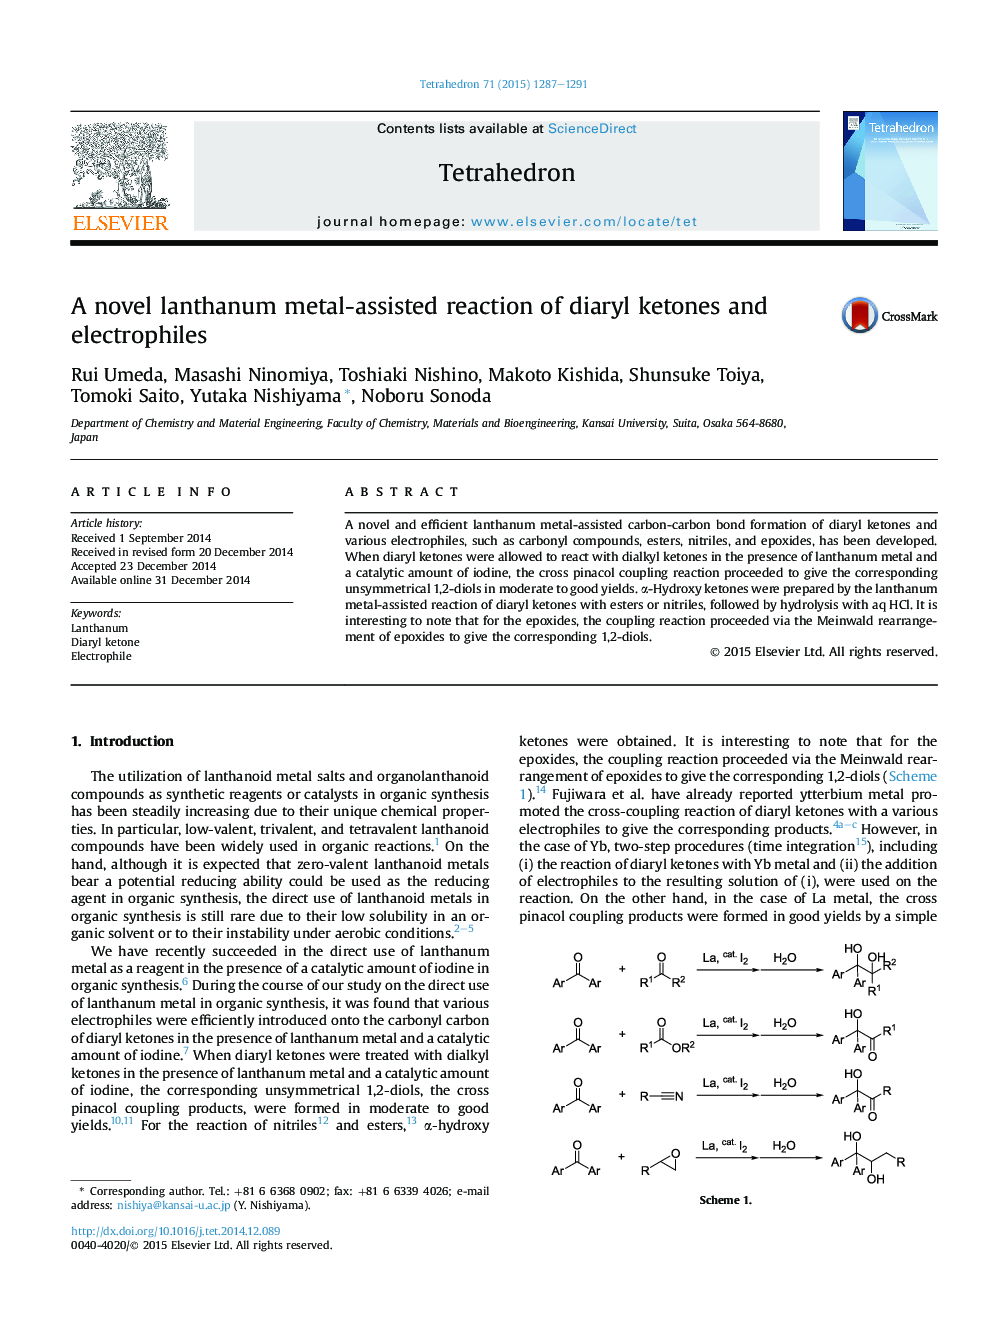 A novel lanthanum metal-assisted reaction of diaryl ketones and electrophiles